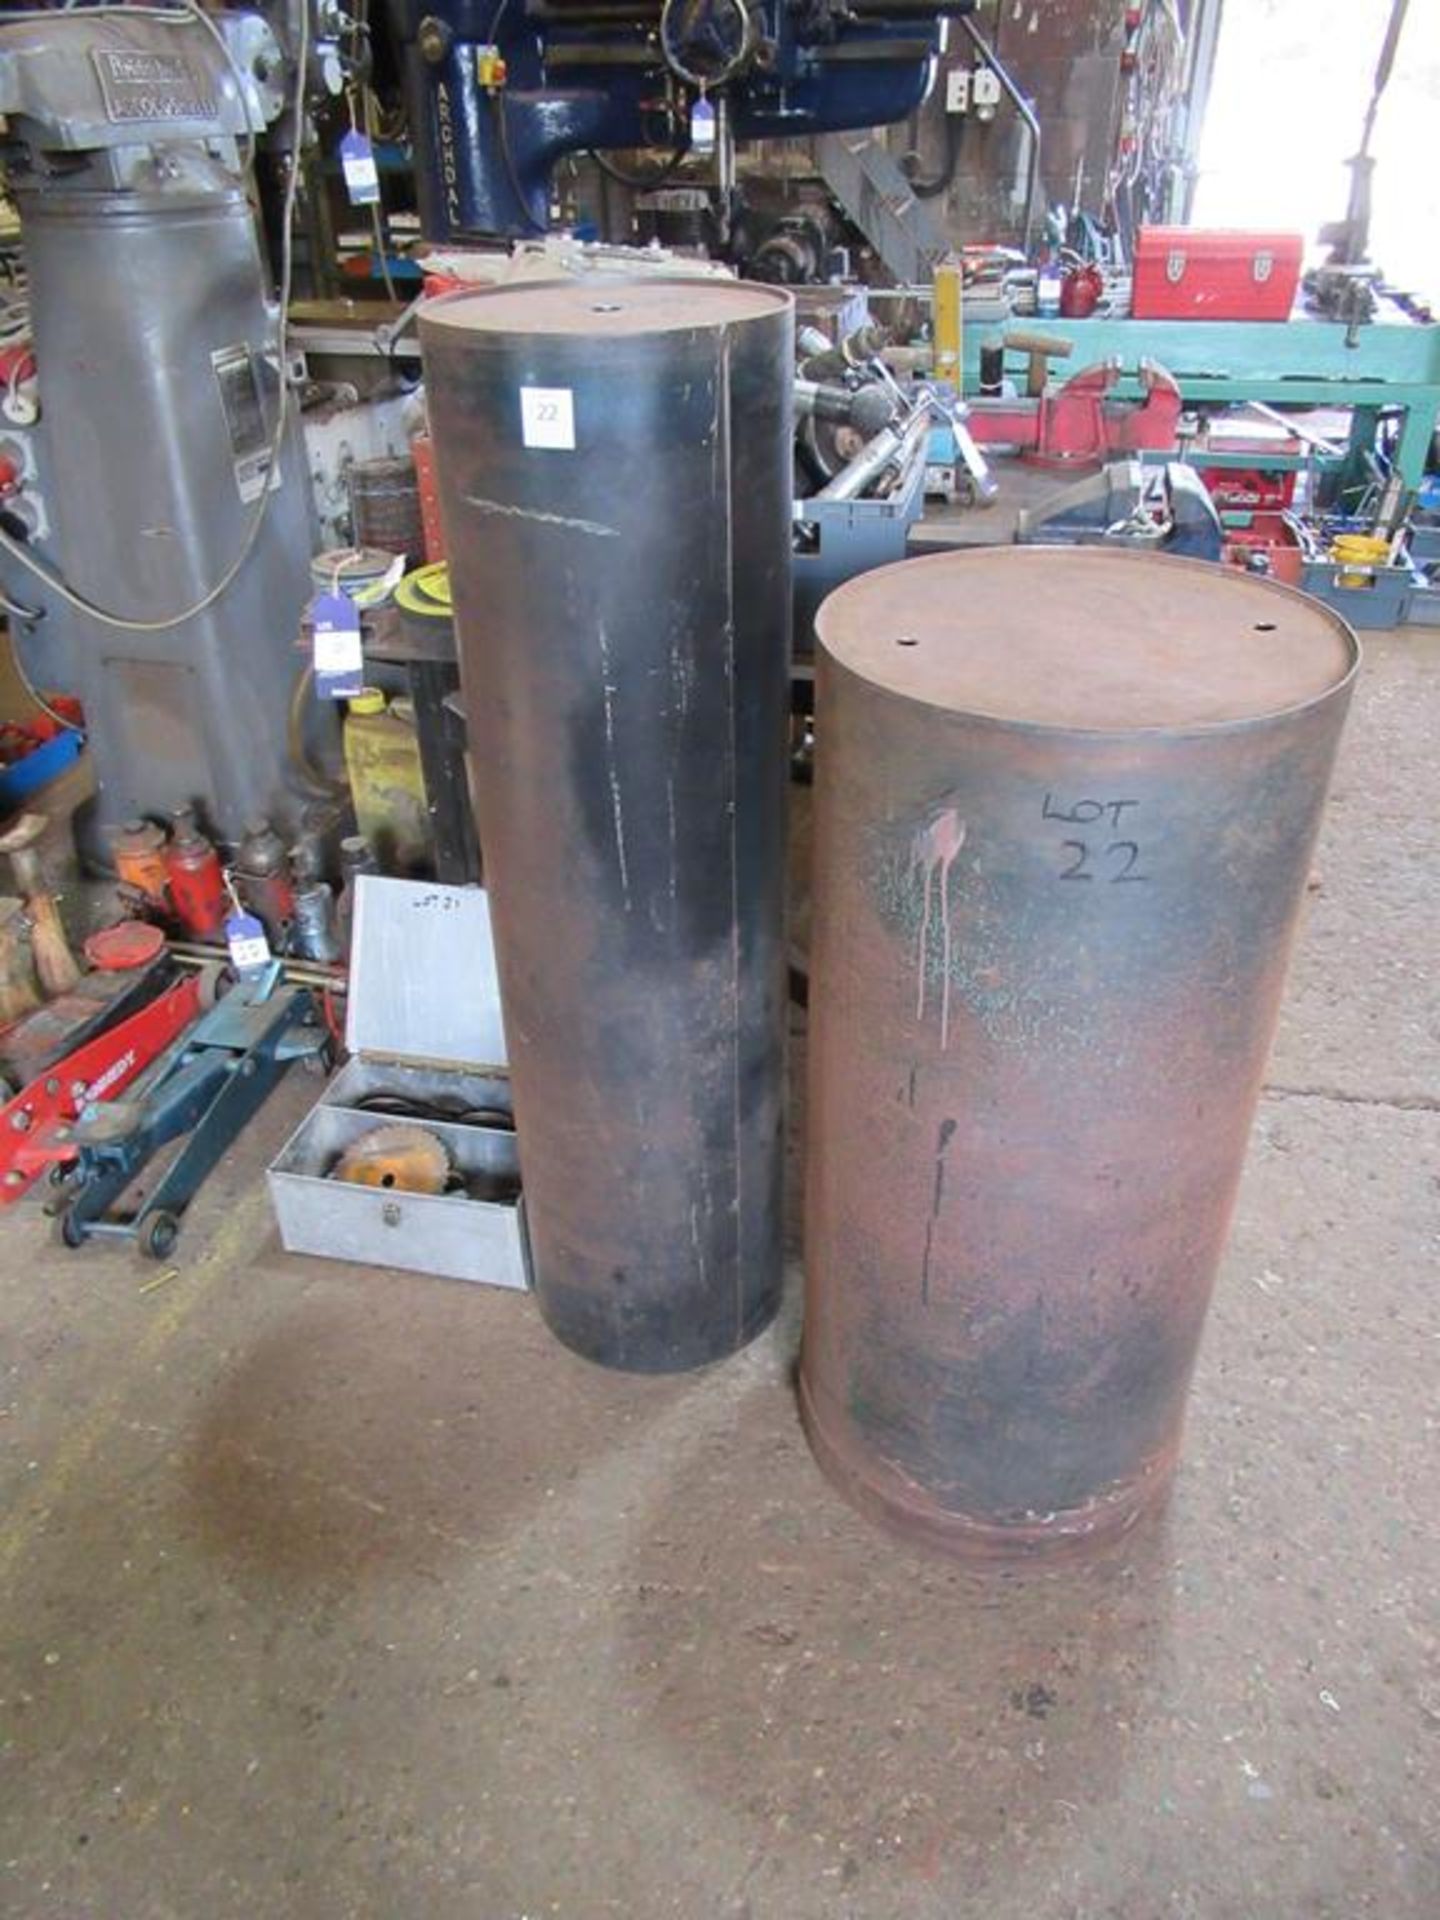 Steel roller drum 1260 x 350mm dia and a steel pedestal 1030 x 460mm dia